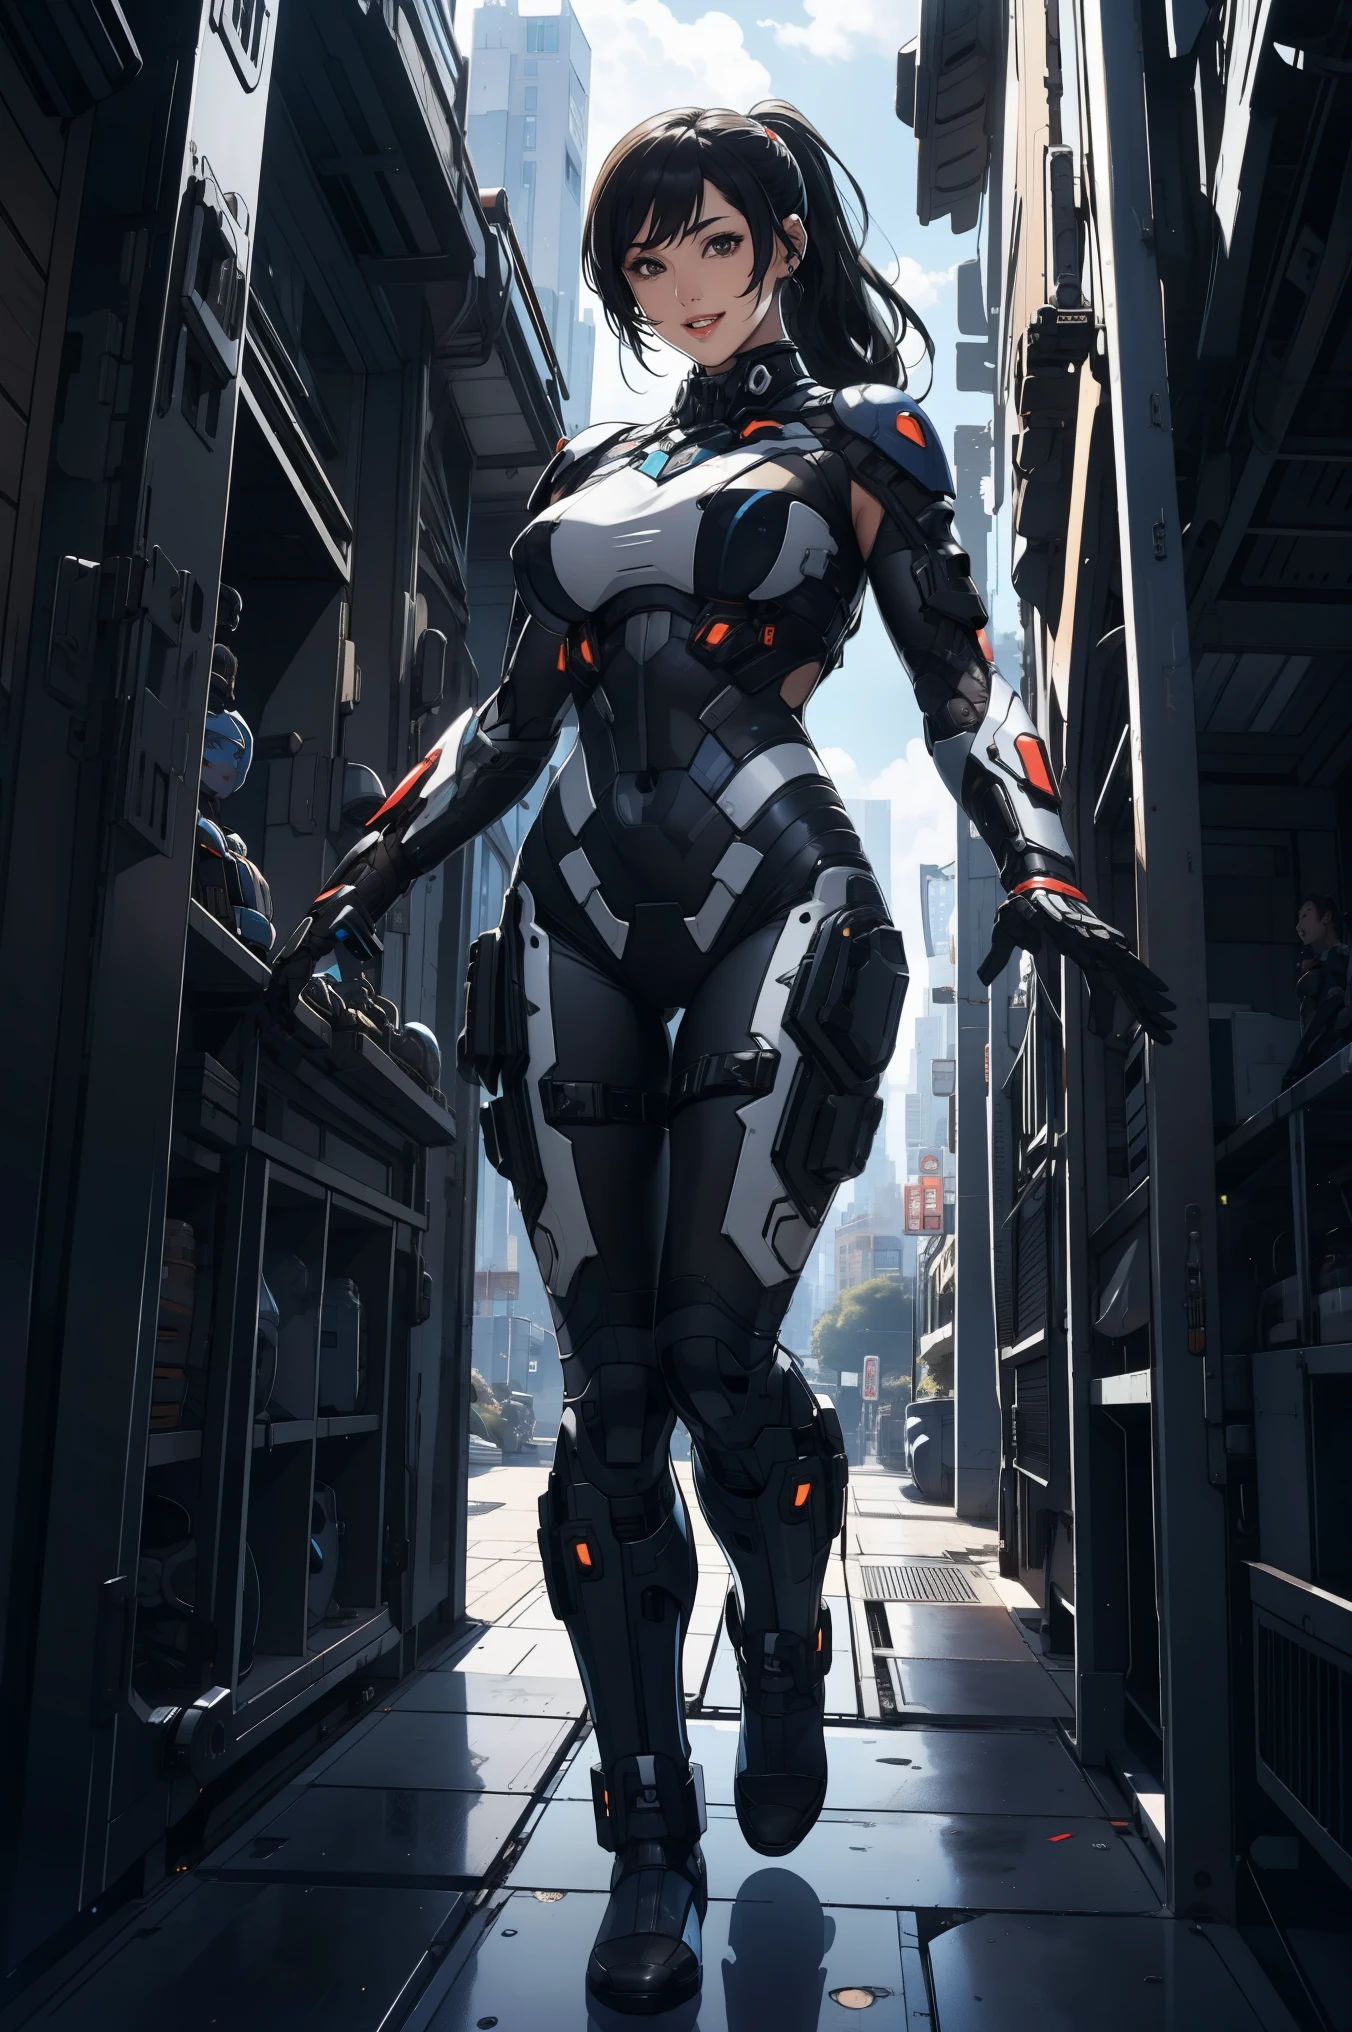 1 girl, black long hair ponytail, huge breast, mecha suit black color  full armor, smiling, arm at the hips, standing , at the centre of city, front view, looking to the viewer,  mouth open wide, fullbody shot, 